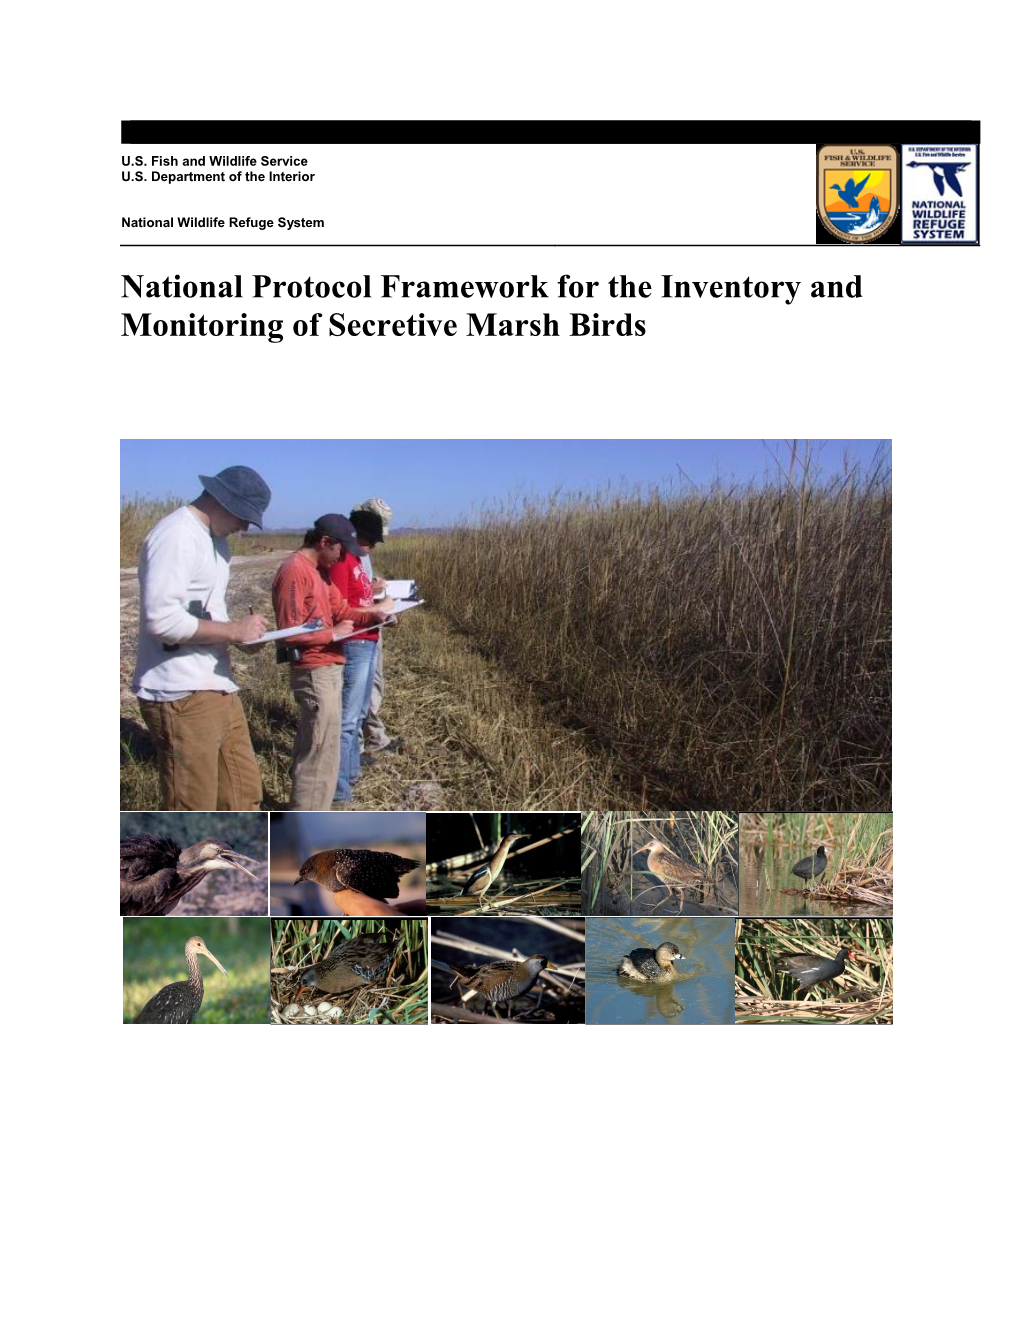 National Protocol Framework for the Inventory and Monitoring of Secretive Marsh Birds